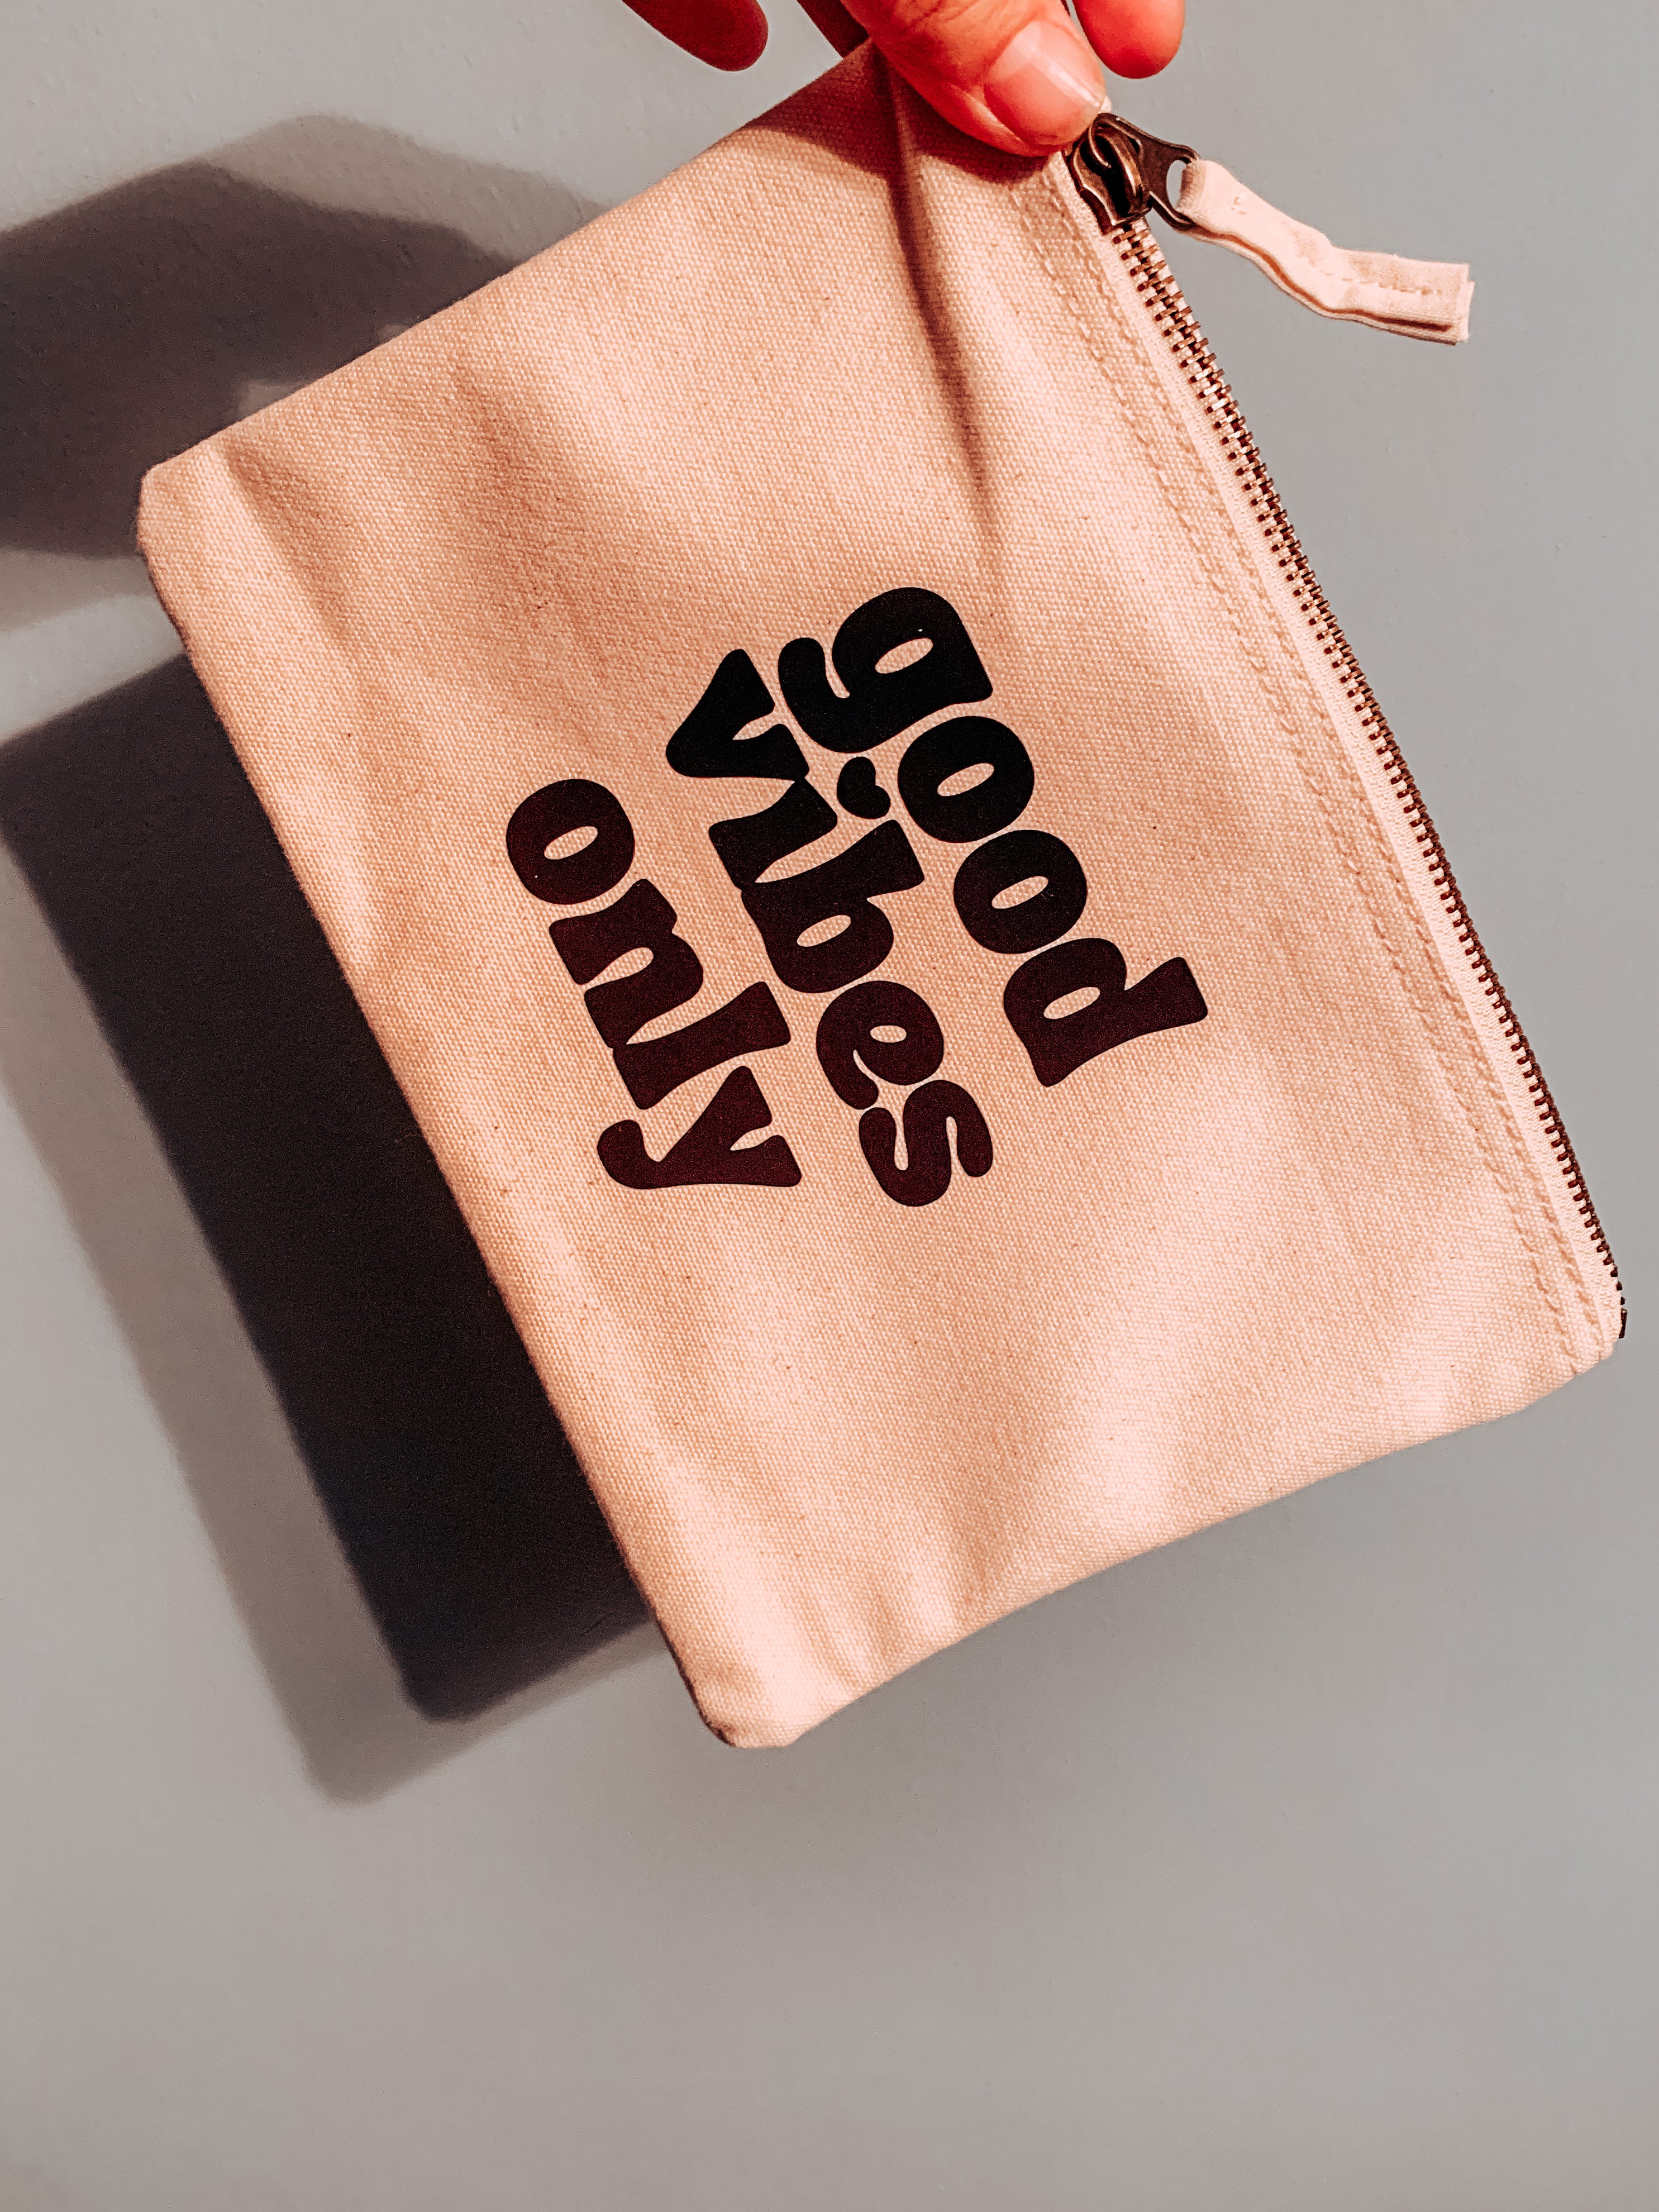 Good Vibes Only cotton canvas pouch /coin purse /make up zip bag